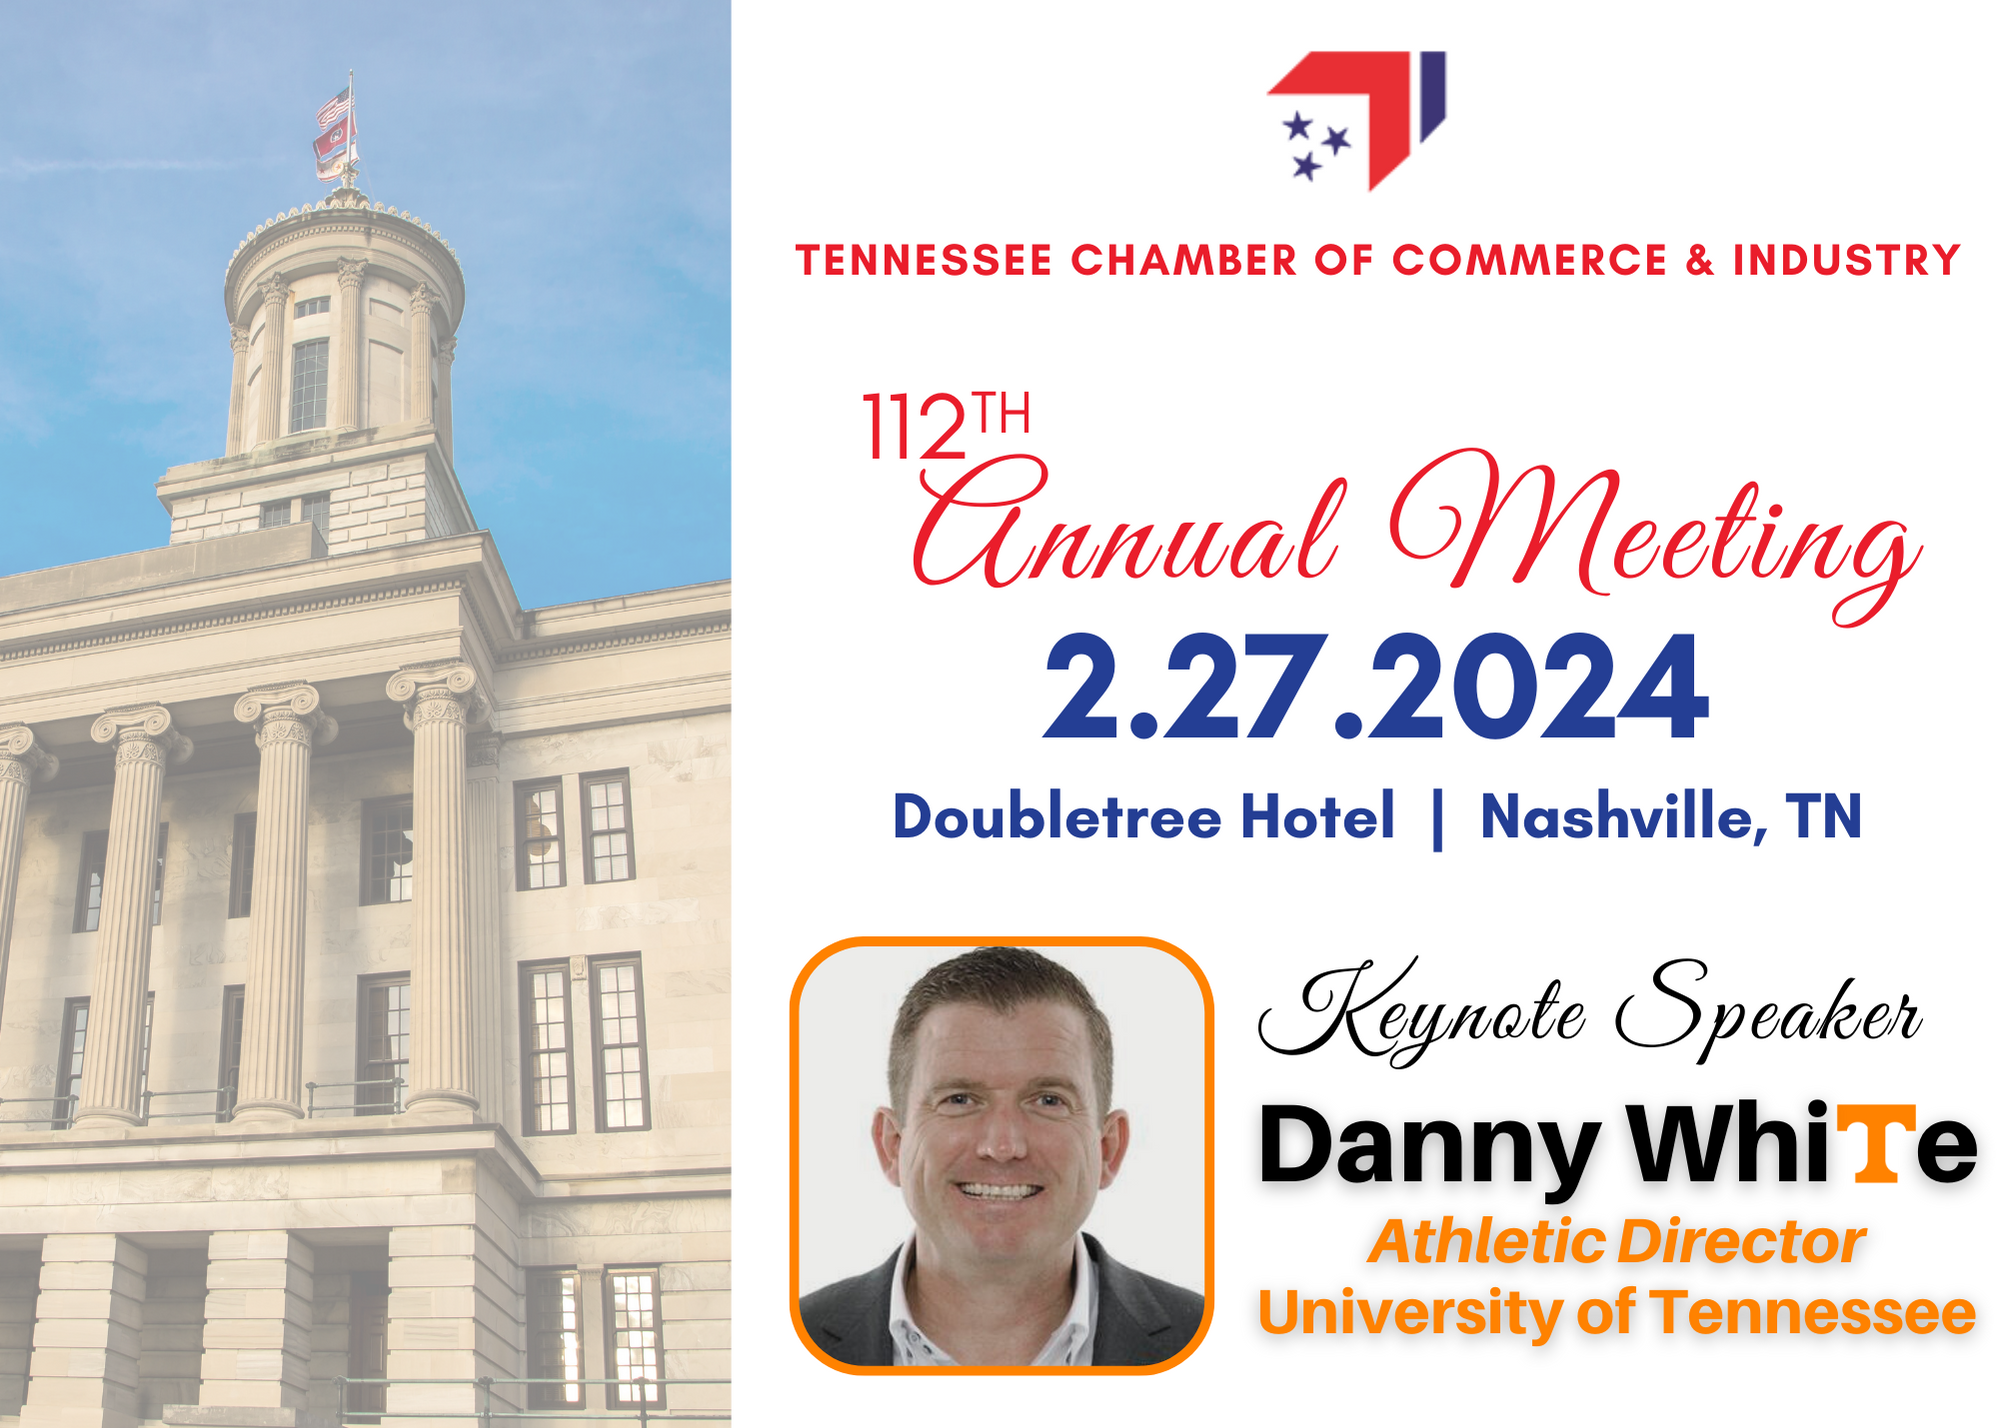 Tennessee Chamber of Commerce & Industry's 112th annual meeting will feature keynote speaker Danny White, Athletic Director at the University of Tennessee.